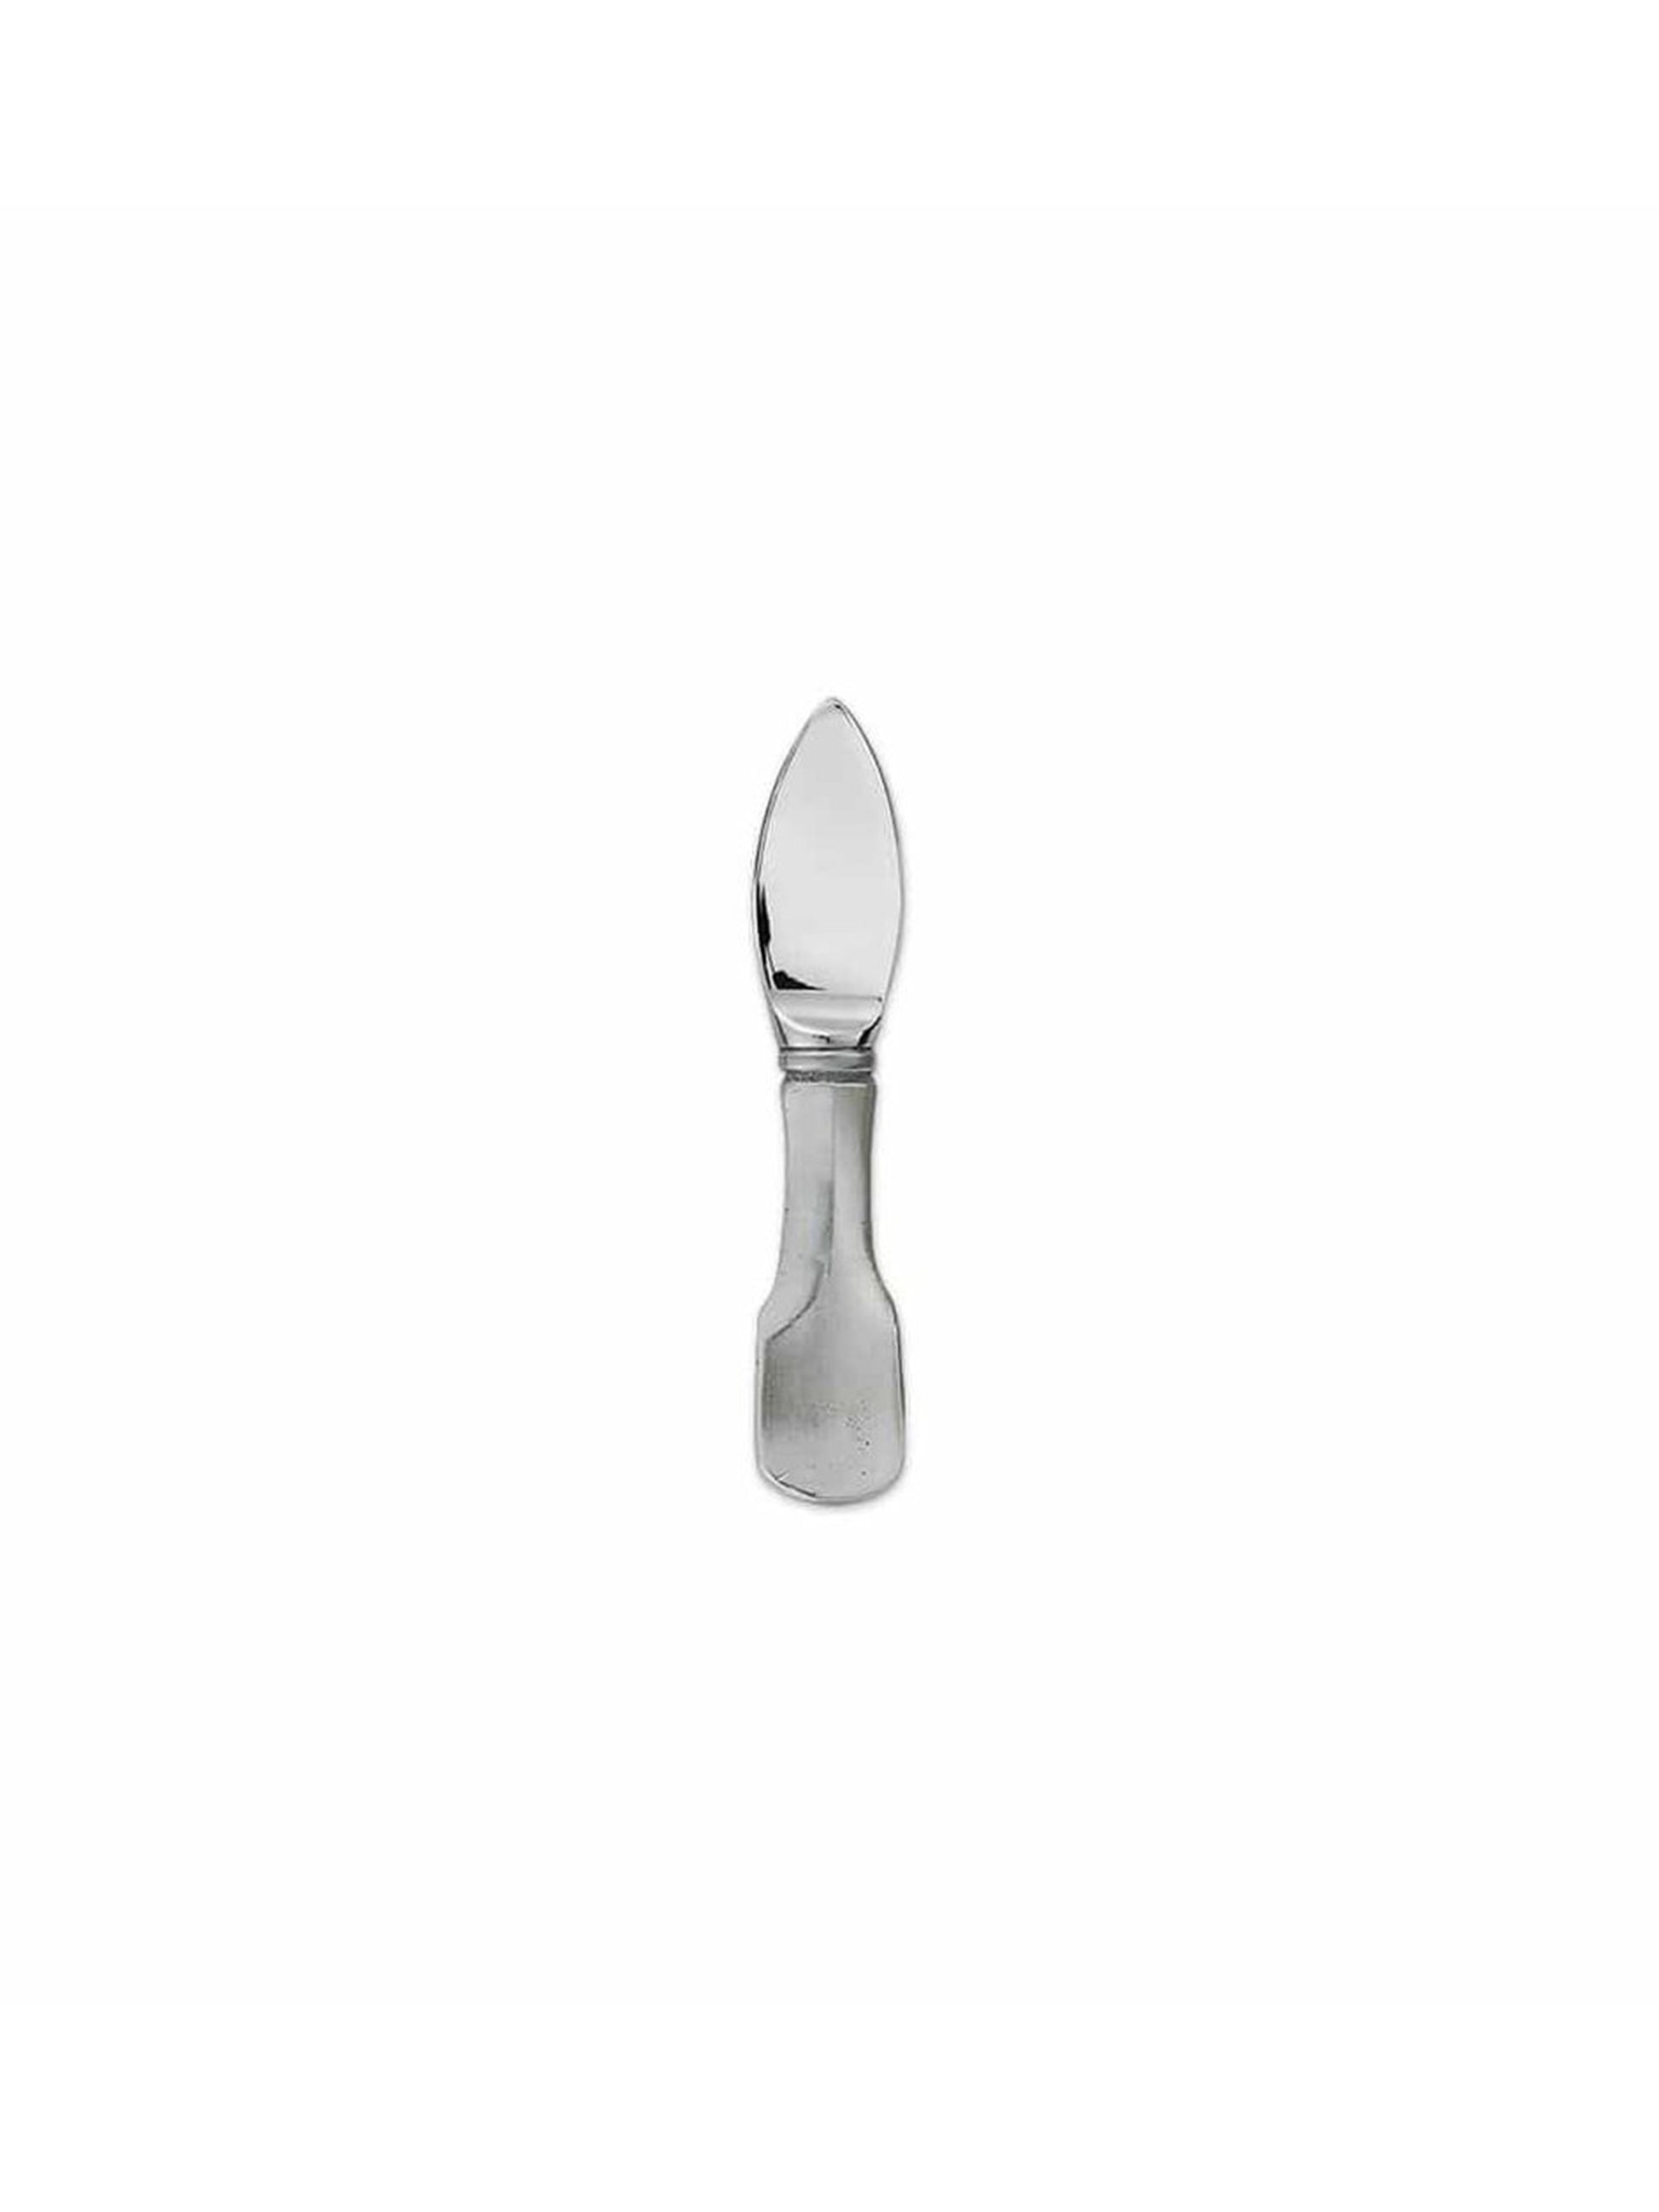 MATCH Pewter Olivia Parmesan Cheese Knife Weston Table